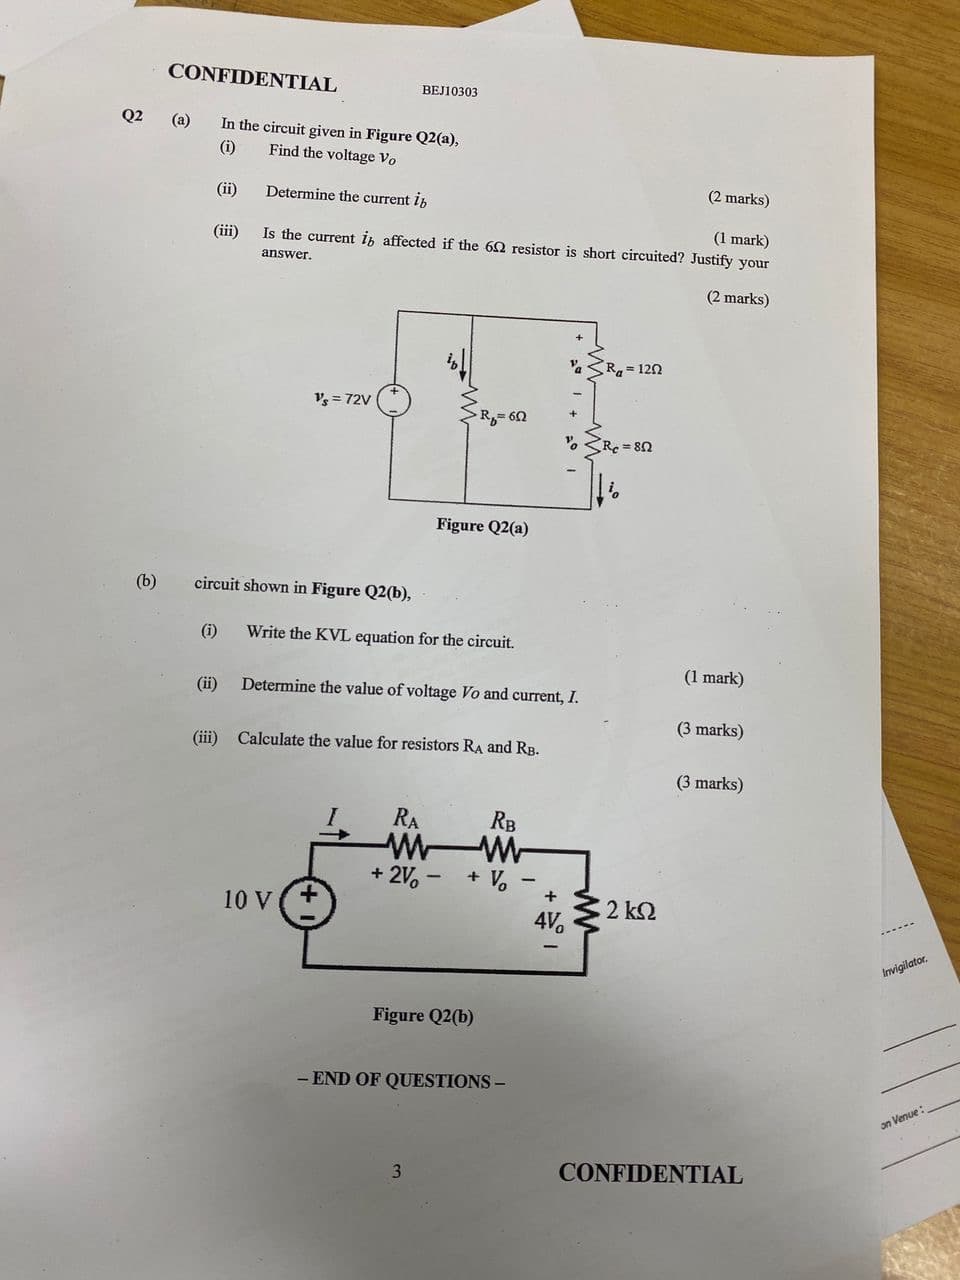 CONFIDENTIAL
BEJ10303
Q2 (a) In the circuit given in Figure Q2(a),
(i)
Find the voltage Vo
(ii)
Determine the current ib
(iii)
(2 marks)
(1 mark)
Is the current i affected if the 62 resistor is short circuited? Justify your
answer.
Ra=1202
V's = 72V
R₁=60
Re=80
Figure Q2(a)
(2 marks)
(b)
circuit shown in Figure Q2(b),
(i)
Write the KVL equation for the circuit.
(1 mark)
(ii) Determine the value of voltage Vo and current, I.
(3 marks)
(iii) Calculate the value for resistors RA and RB.
(3 marks)
1
+2%-
10 V+
RA
ww
RB
+ Vo
+
2 ΚΩ
4V
Figure Q2(b)
-END OF QUESTIONS -
3
-
Invigilator.
CONFIDENTIAL
on Venue: